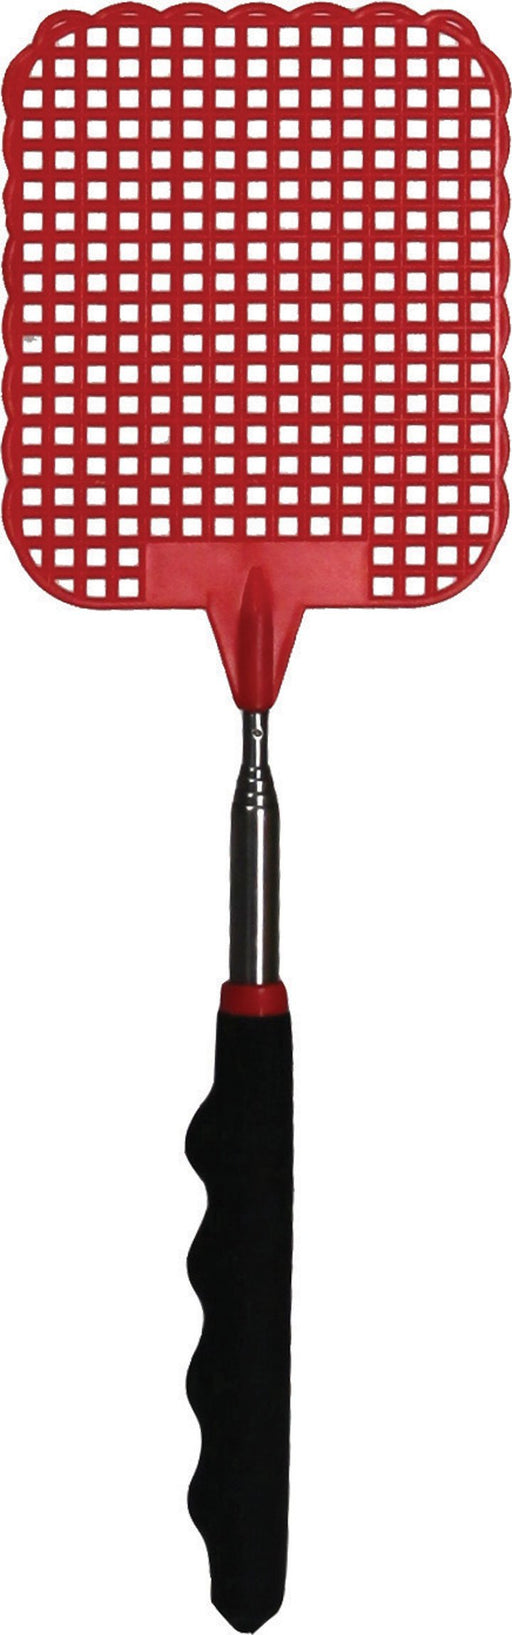 Extendable Fly Swatter Leisure The Cabin Depot- The Cabin Depot Off-Grid Off Grid Living Solutions Cabin Cottage Camp Solar Panel Water Heater Hunting Fishing Boats RVs Outdoors